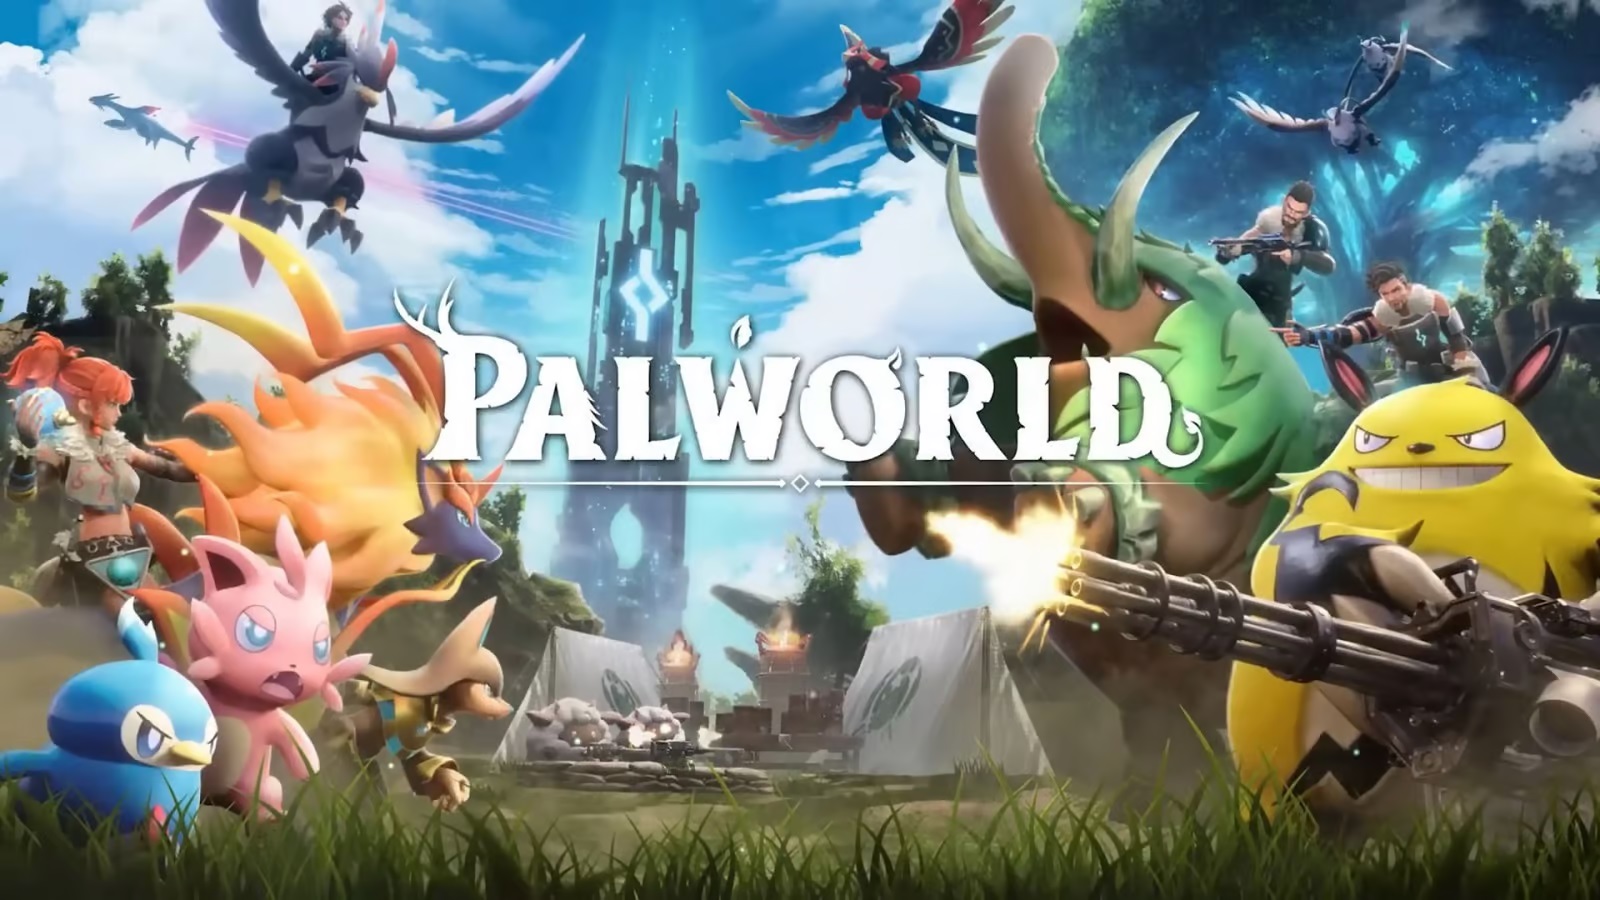 Palworld becomes the most popular game on Steam with 1 million players